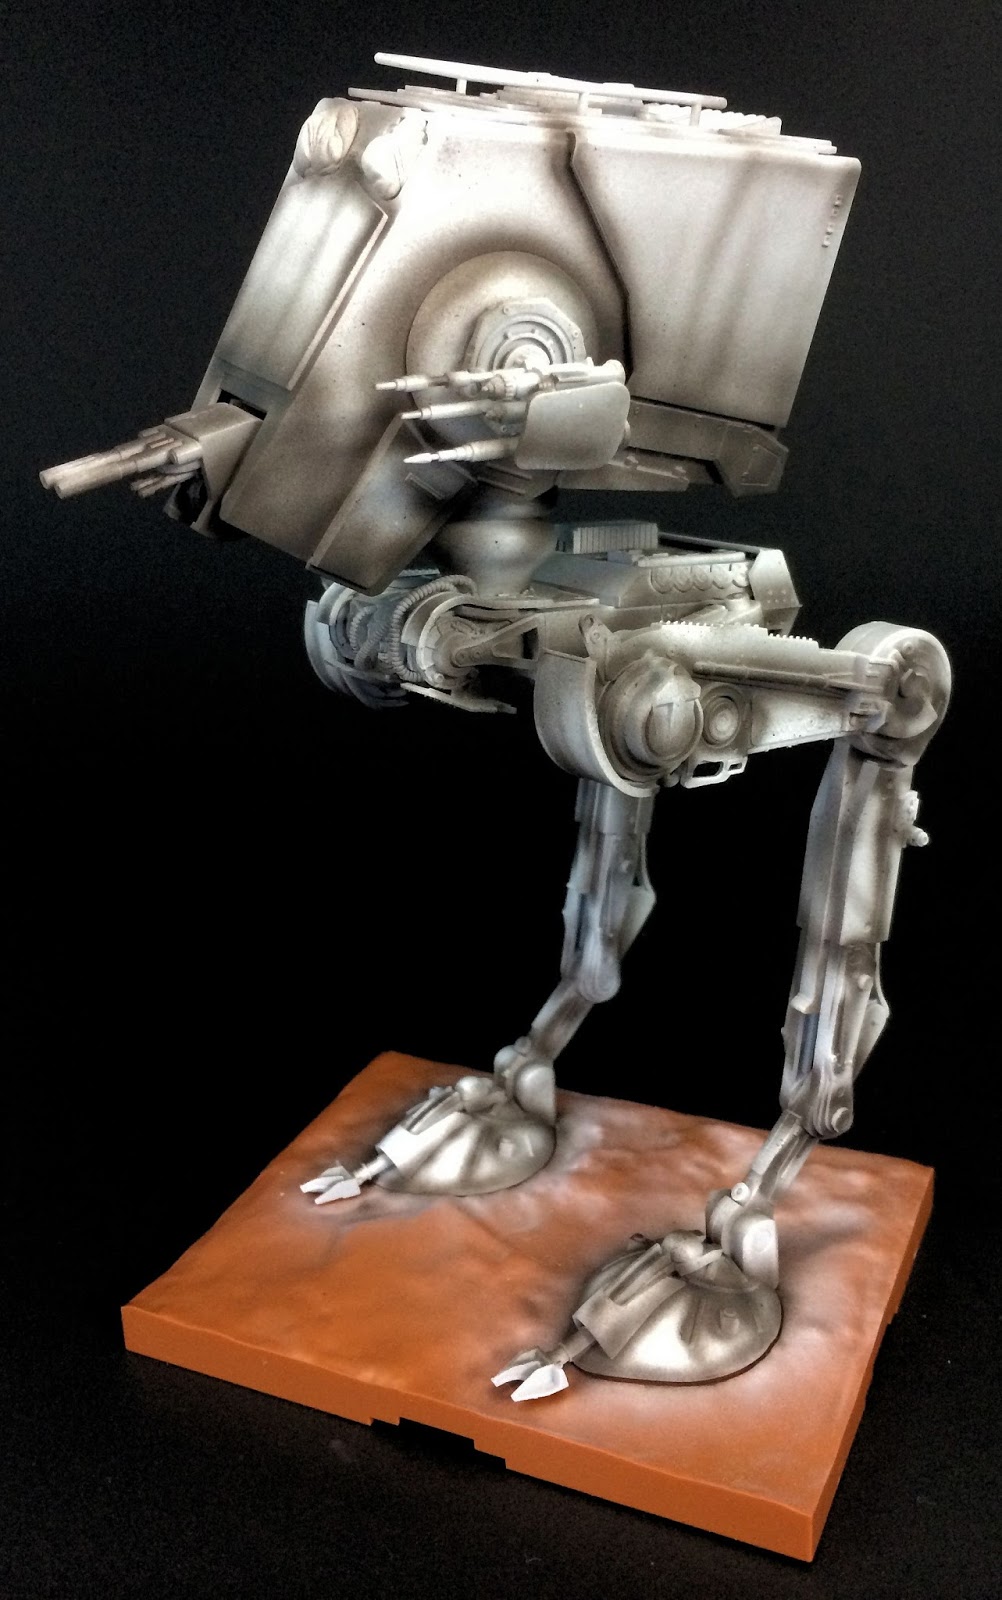 The Modelling News: Review: Bandai 1/48th Star Wars AT-ST - is this the  crossover kit we have been waiting for?